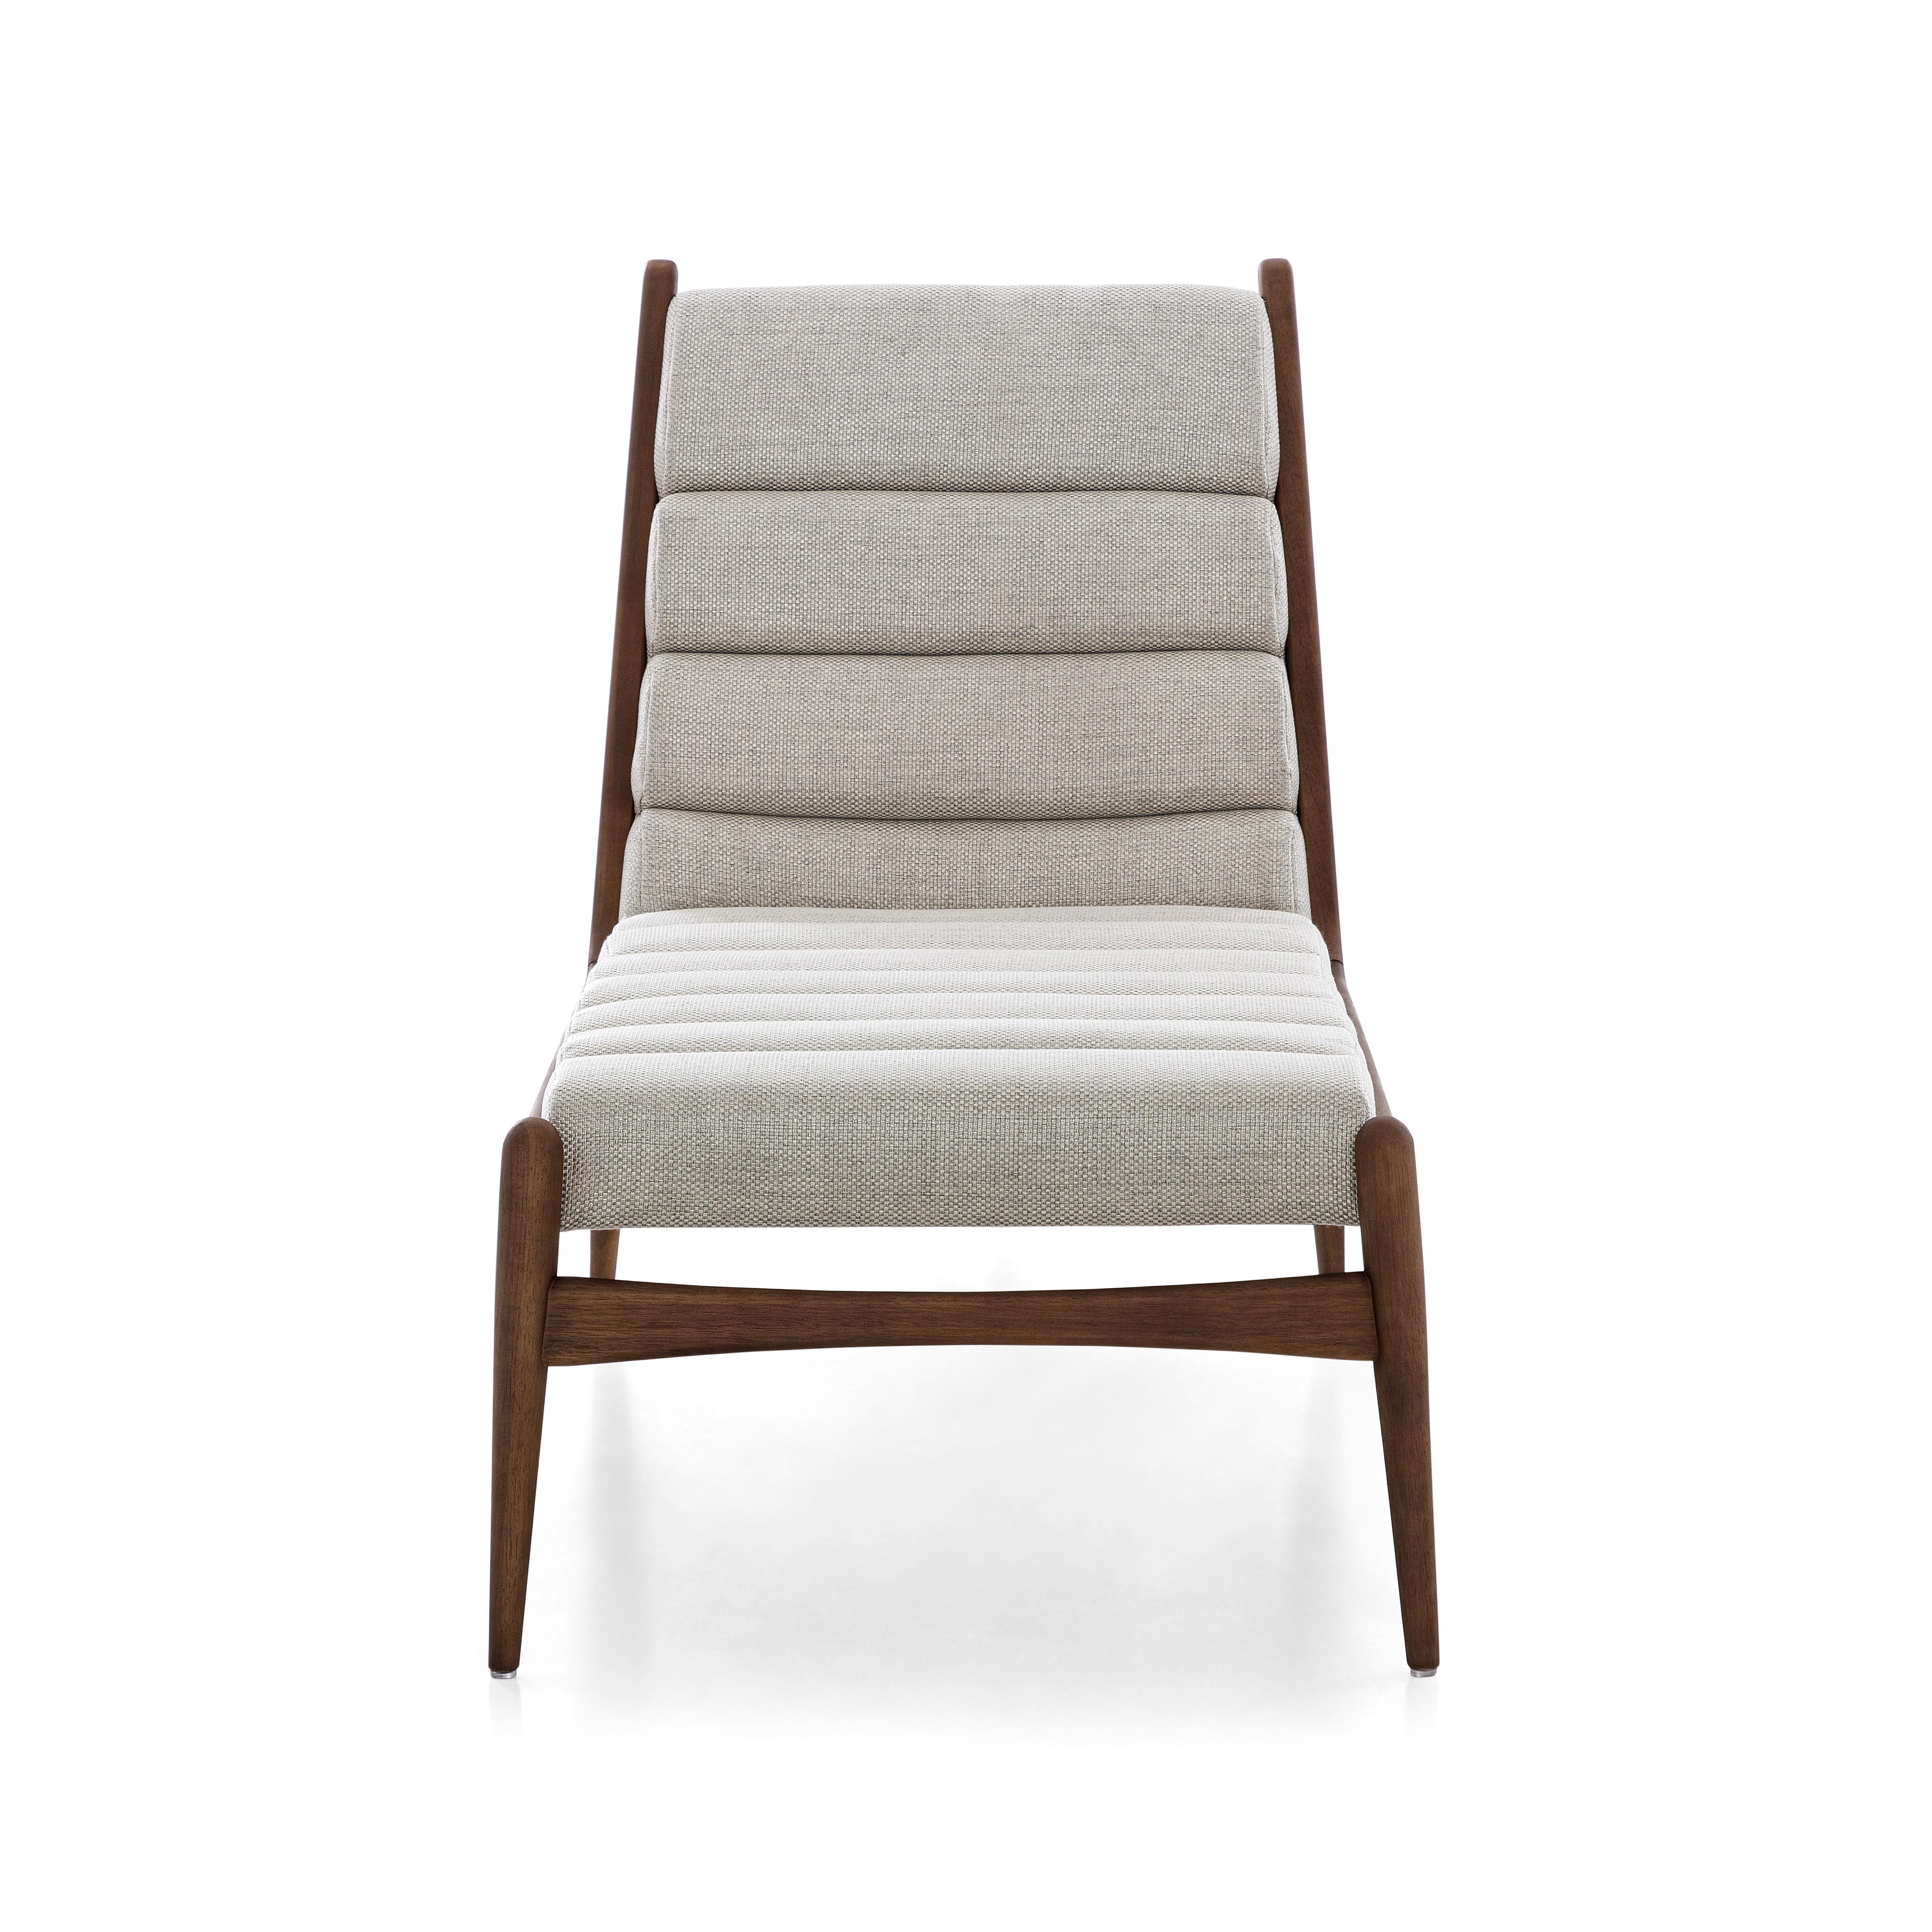 Upholstery Wave Chaise in Walnut Finish and Off-White Fabric